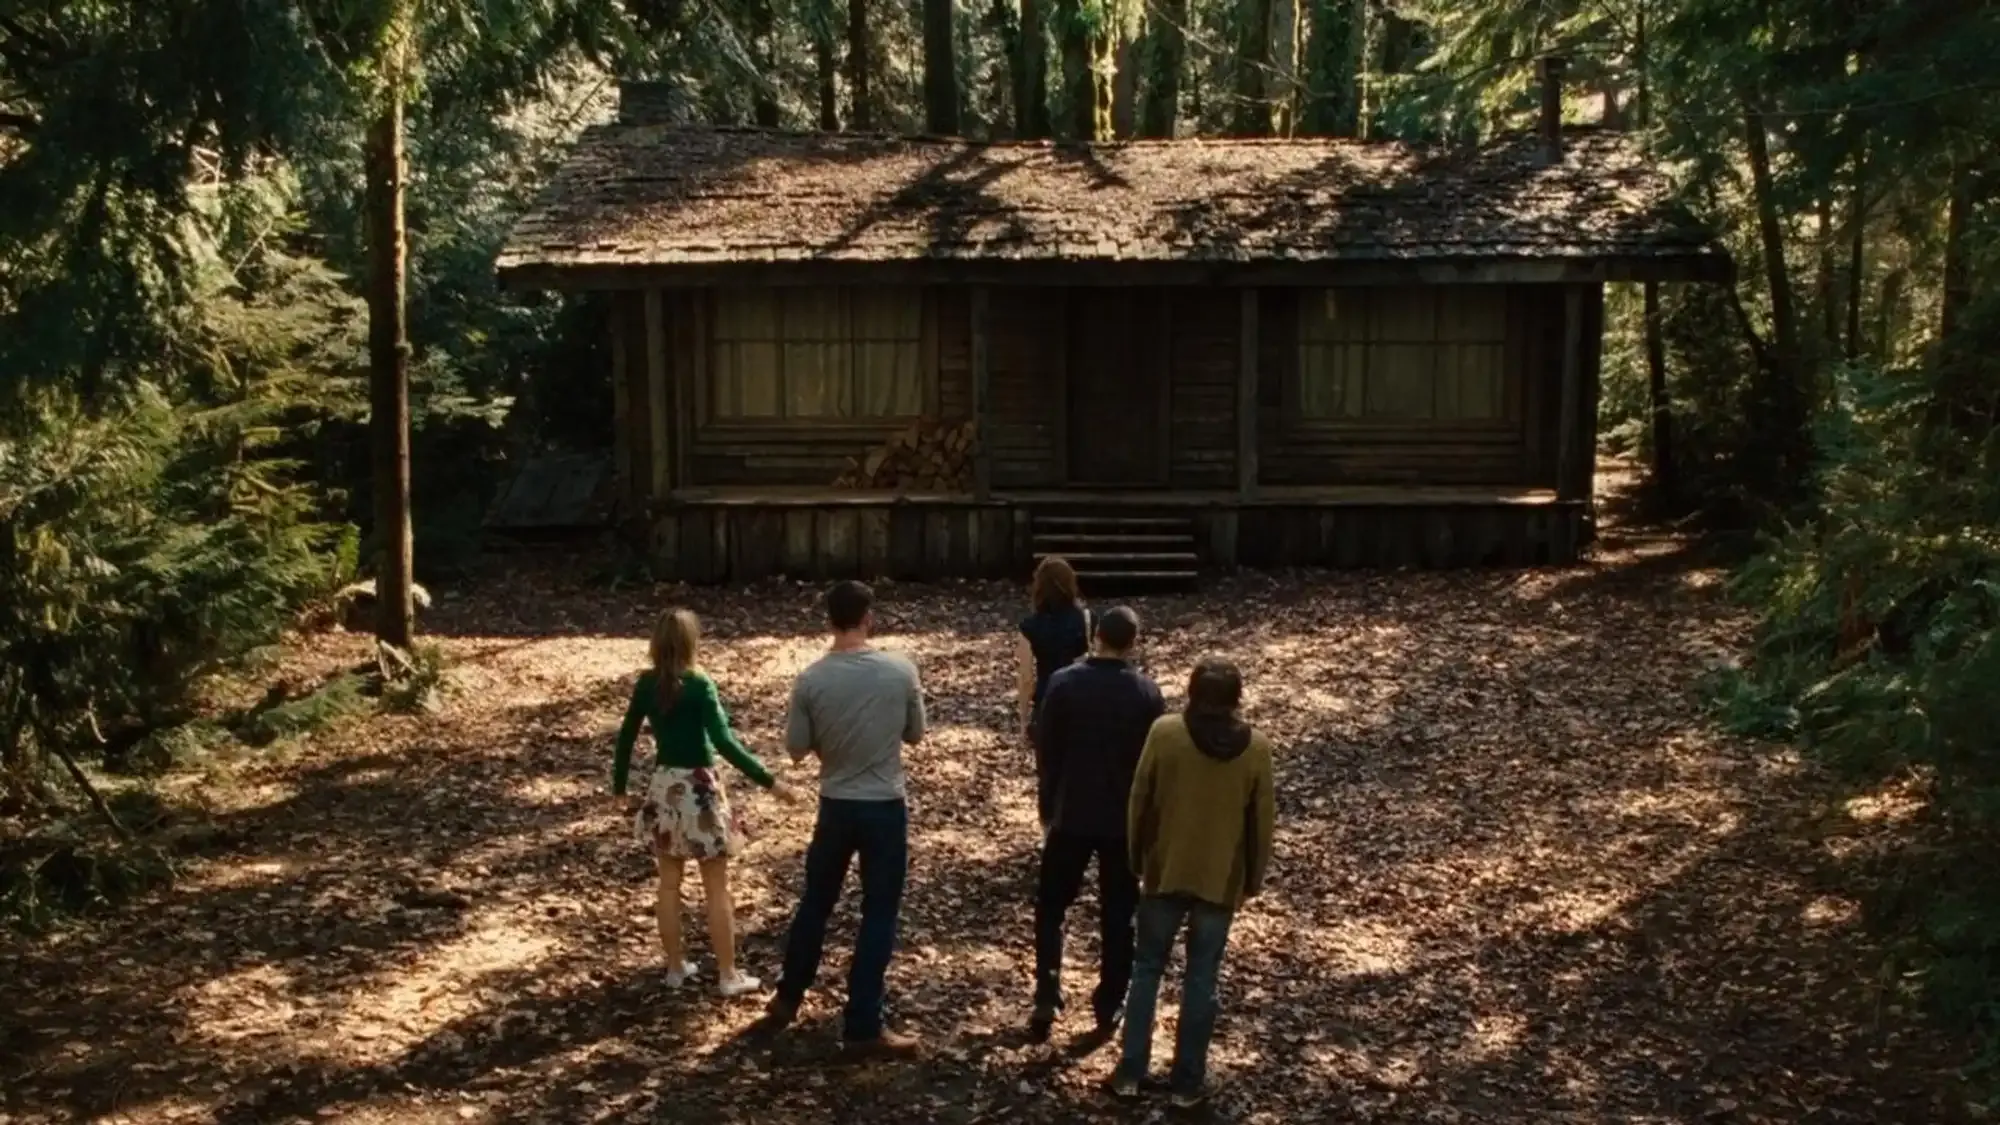 The Cabin in the Woods movie review